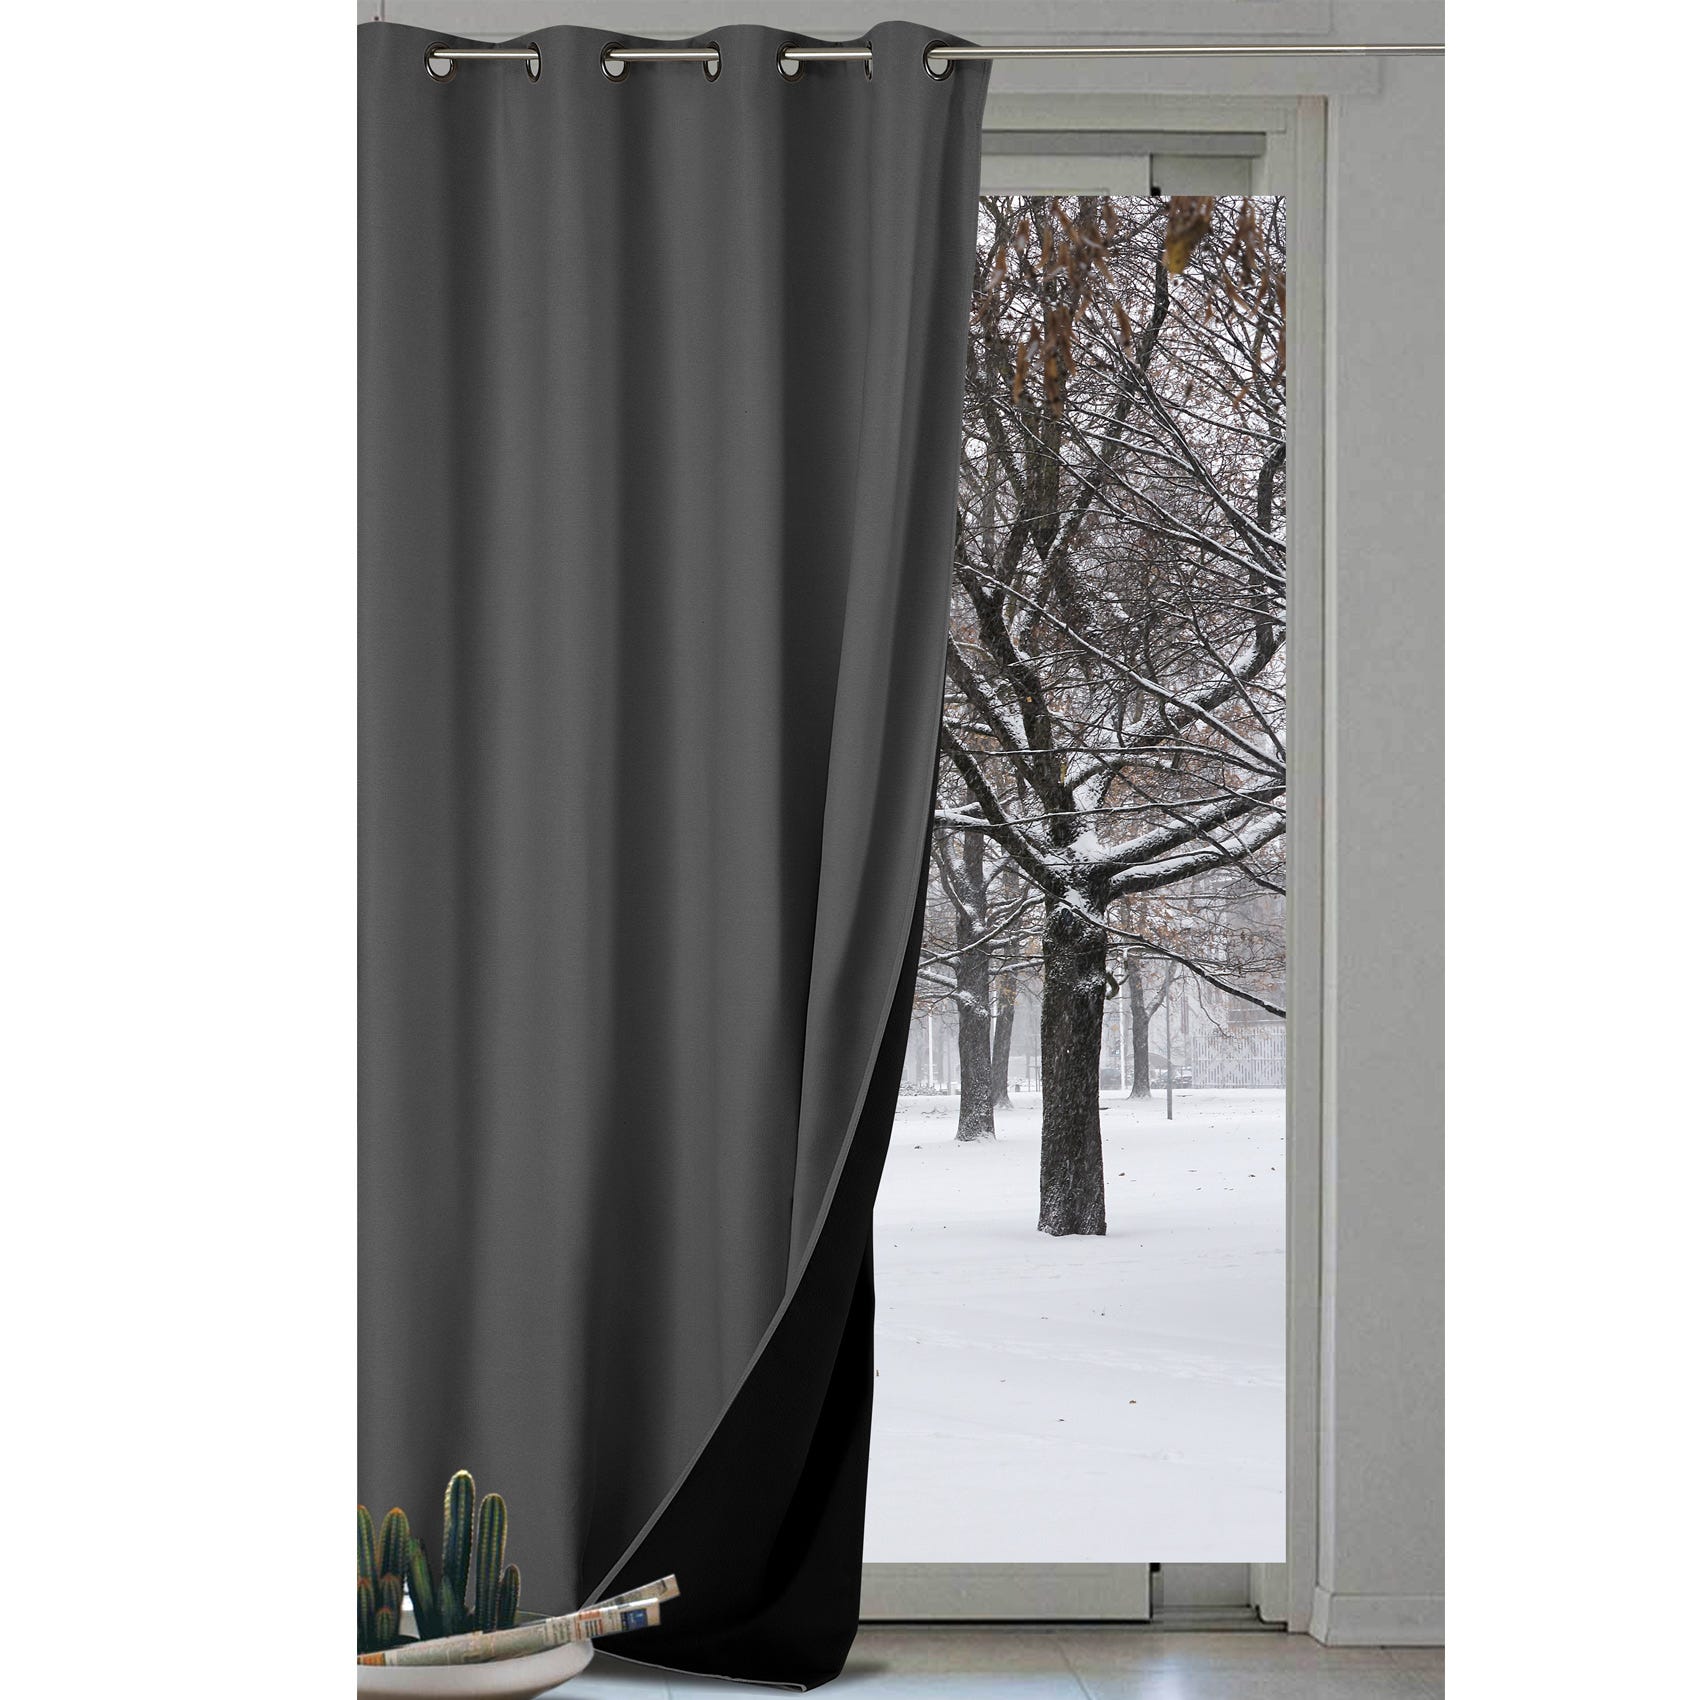 Rideau anti-froid doublé polaire - Gris anthracite - 140x300 cm -  Polyester/Occultant